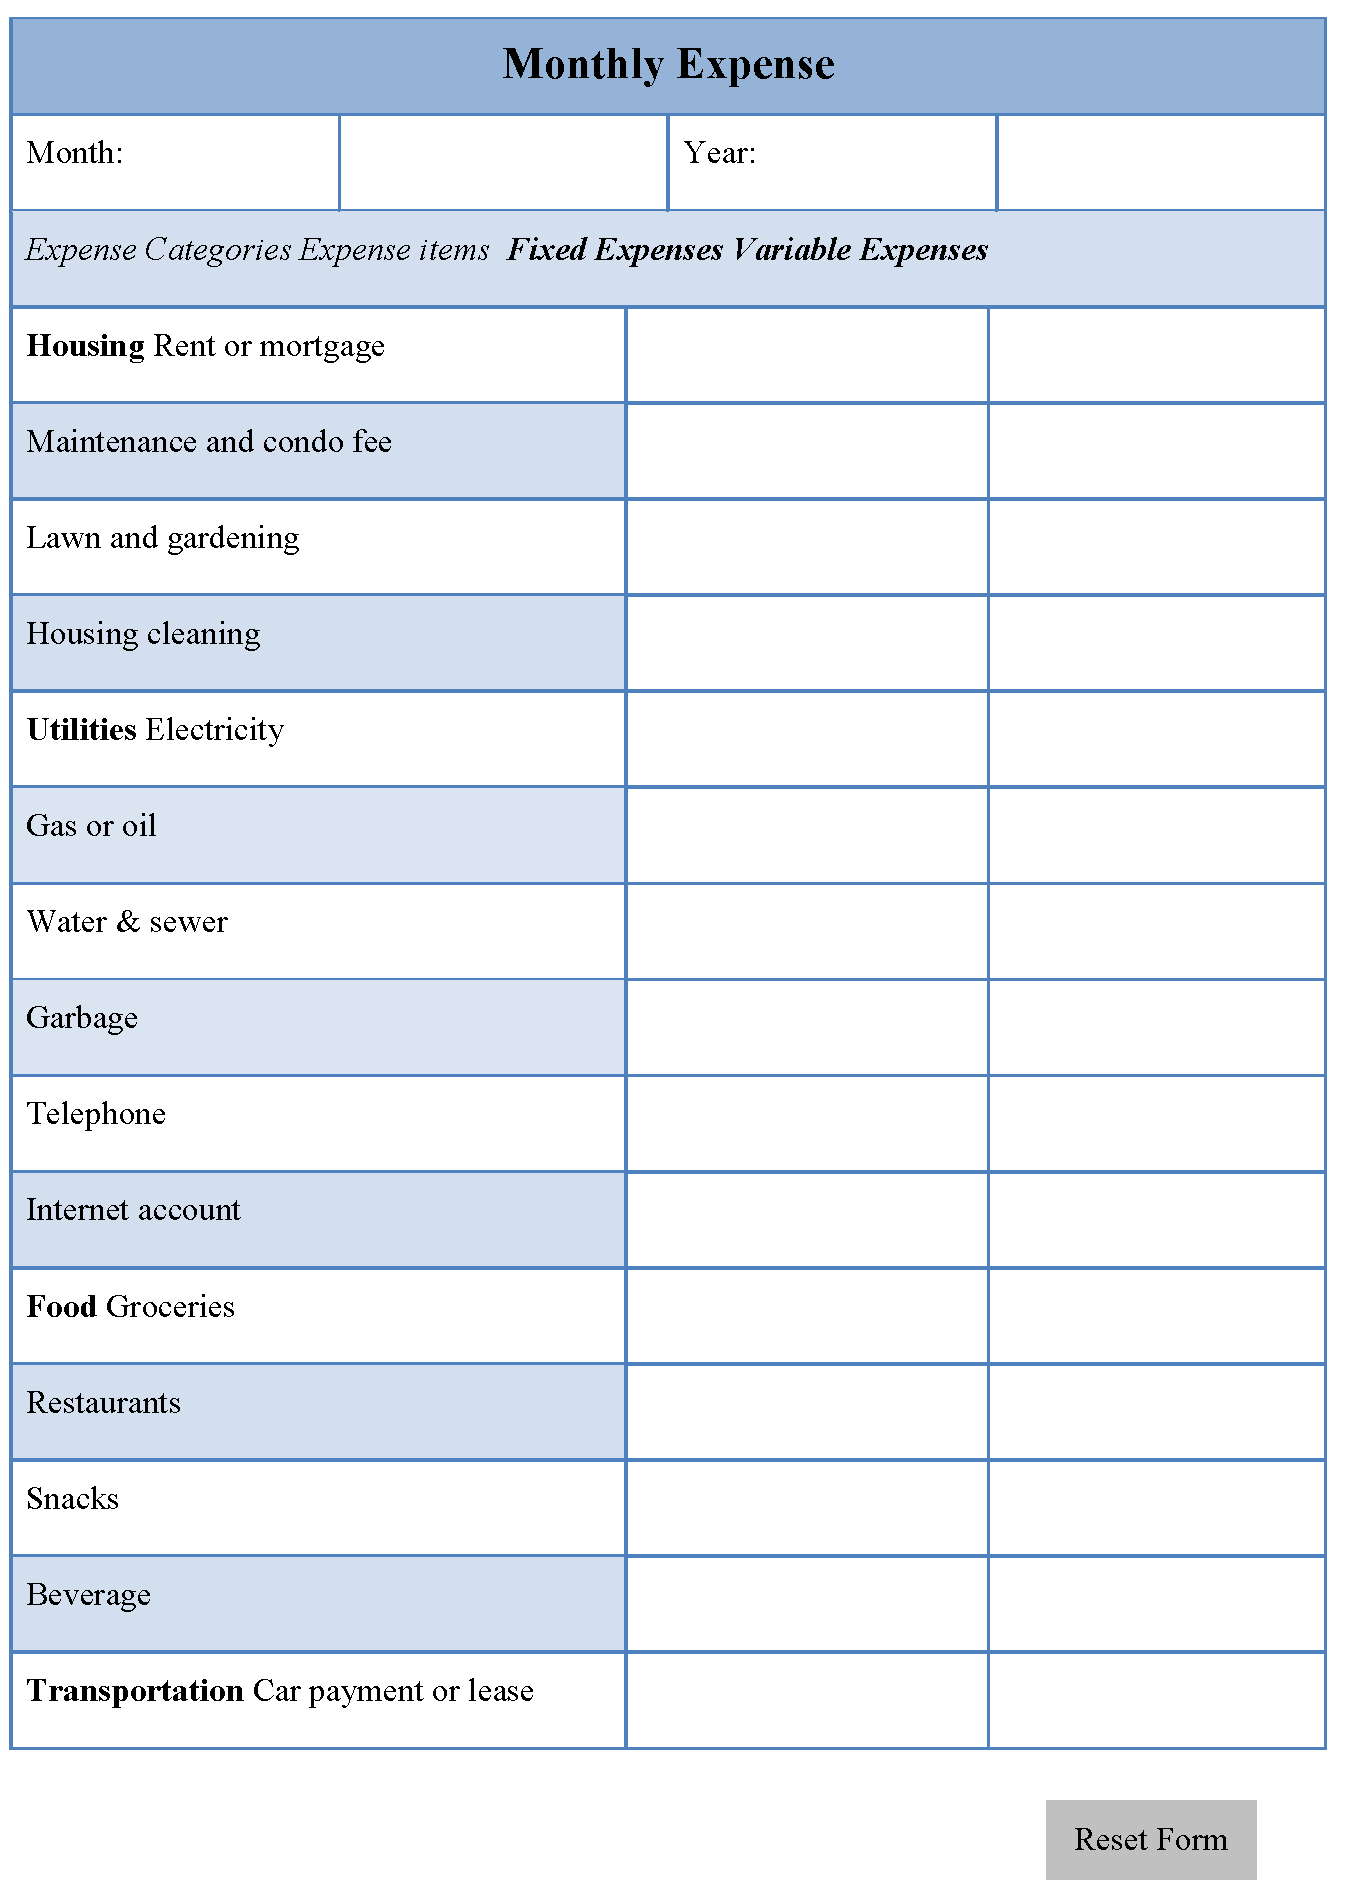 monthly-expense-form-editable-forms